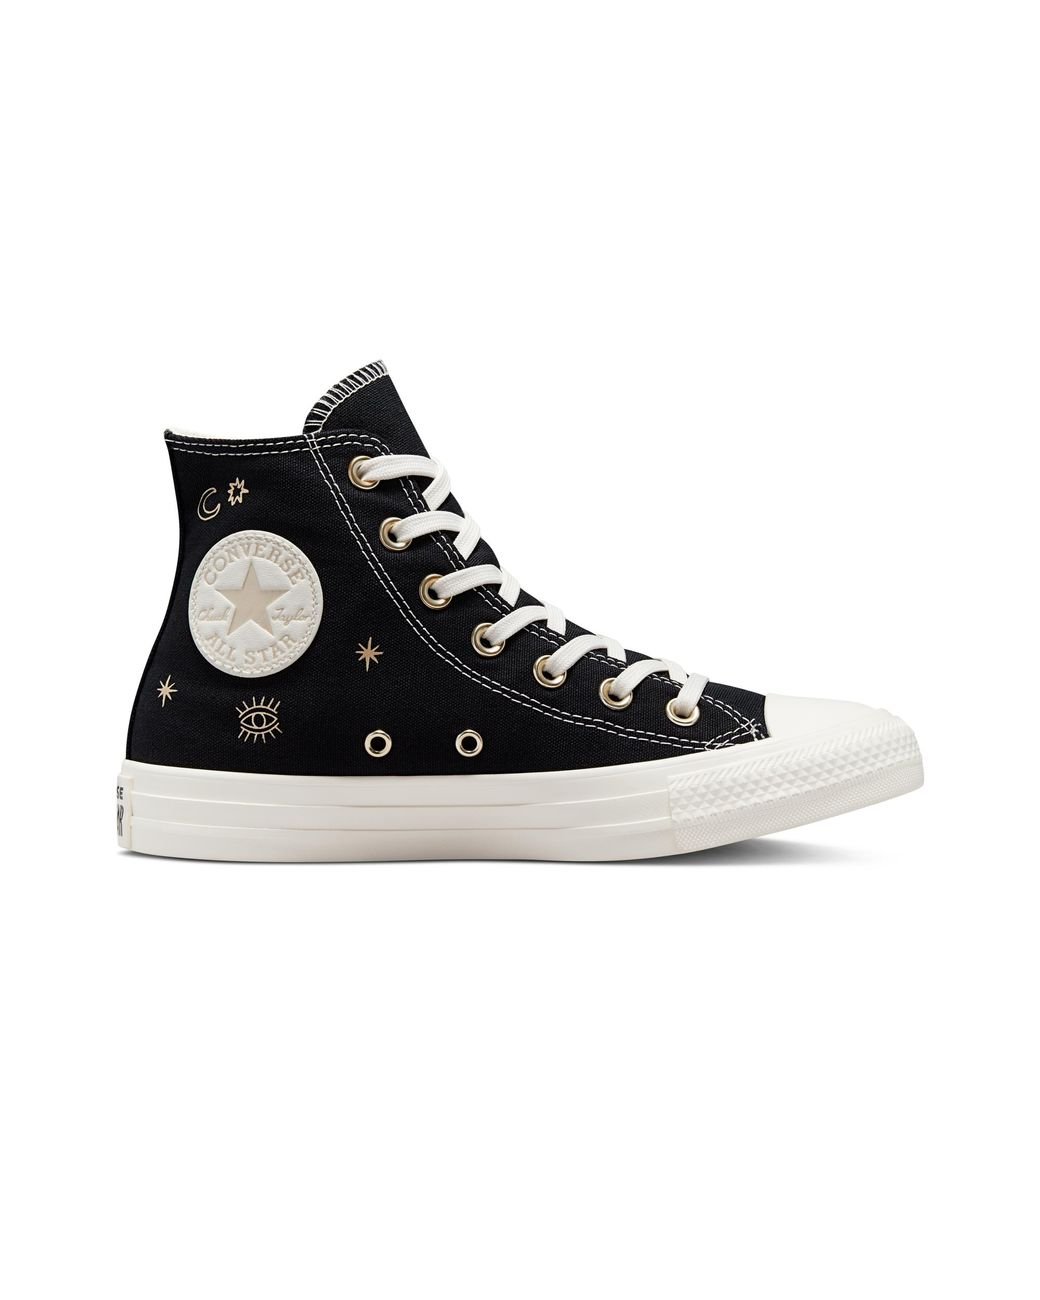 Converse Chuck Taylor All Star Golden Elements in Black | Lyst